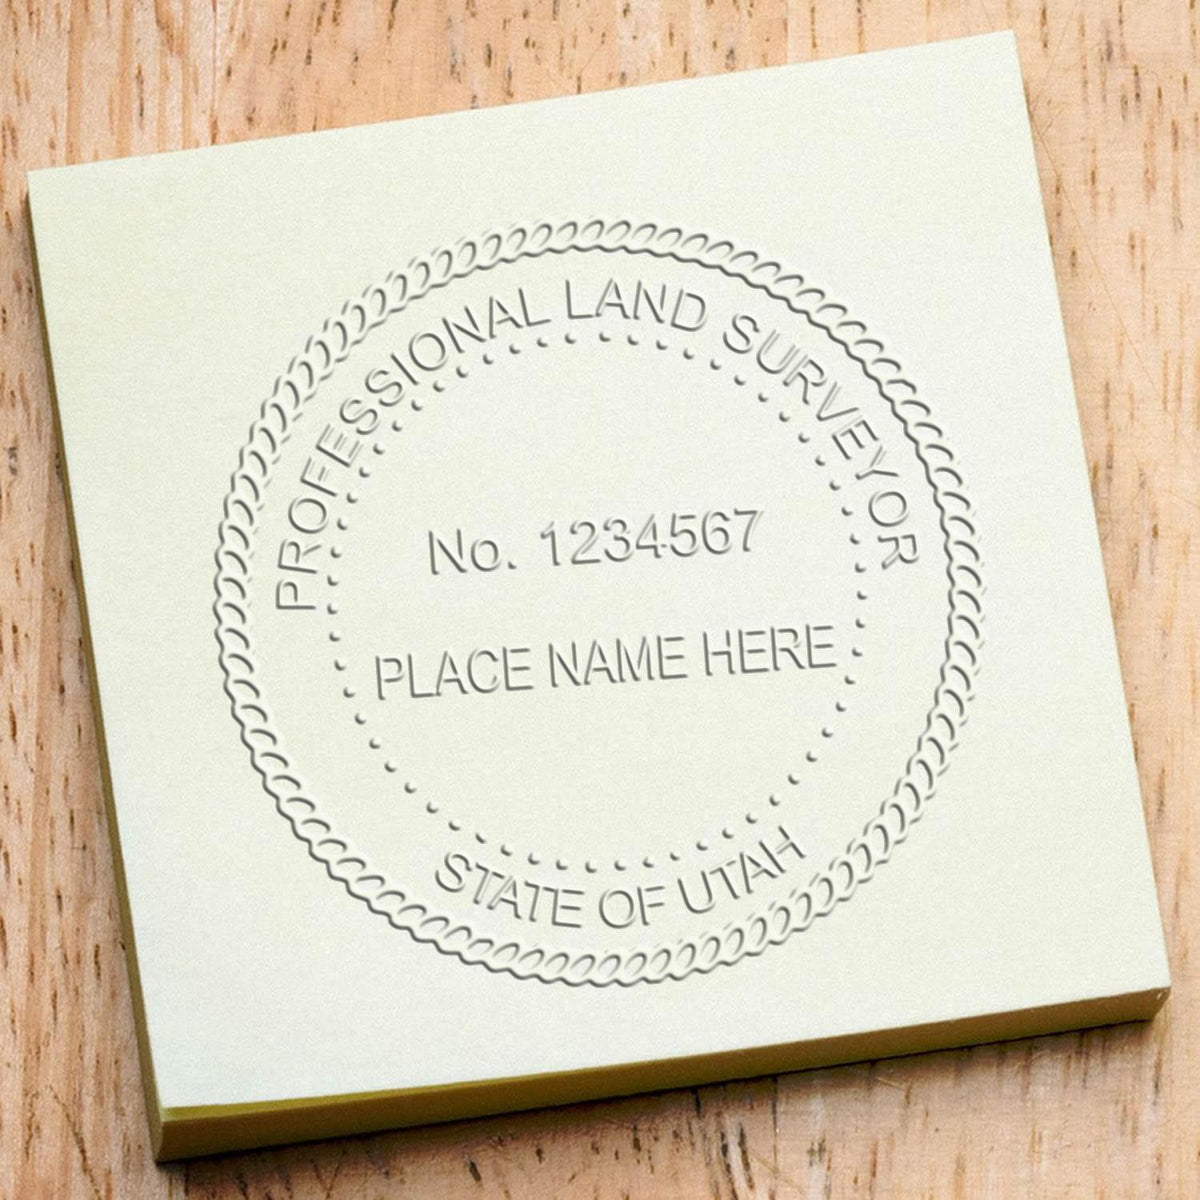 A photograph of the State of Utah Soft Land Surveyor Embossing Seal stamp impression reveals a vivid, professional image of the on paper.